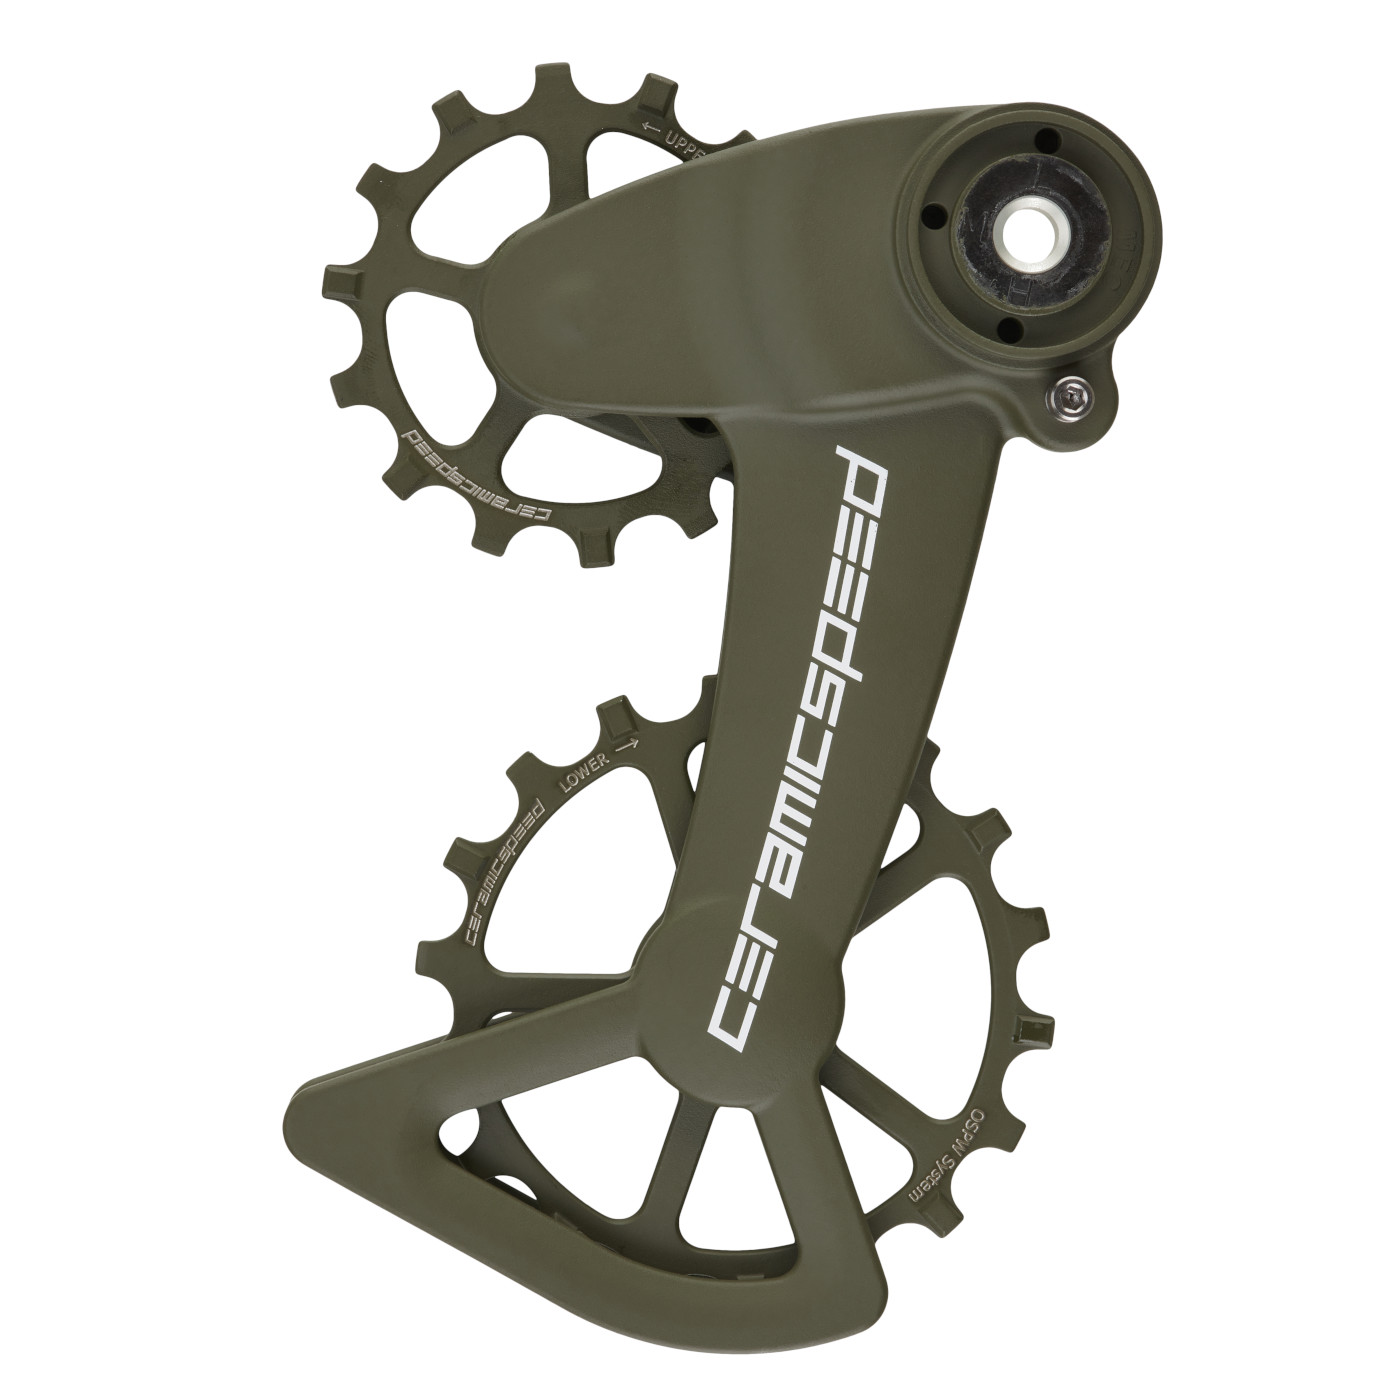 Picture of CeramicSpeed Limited Edition Cerakote OSPW X Derailleur Pulley System - for SRAM Eagle | 14/18 Teeth | Coated Bearings - olive